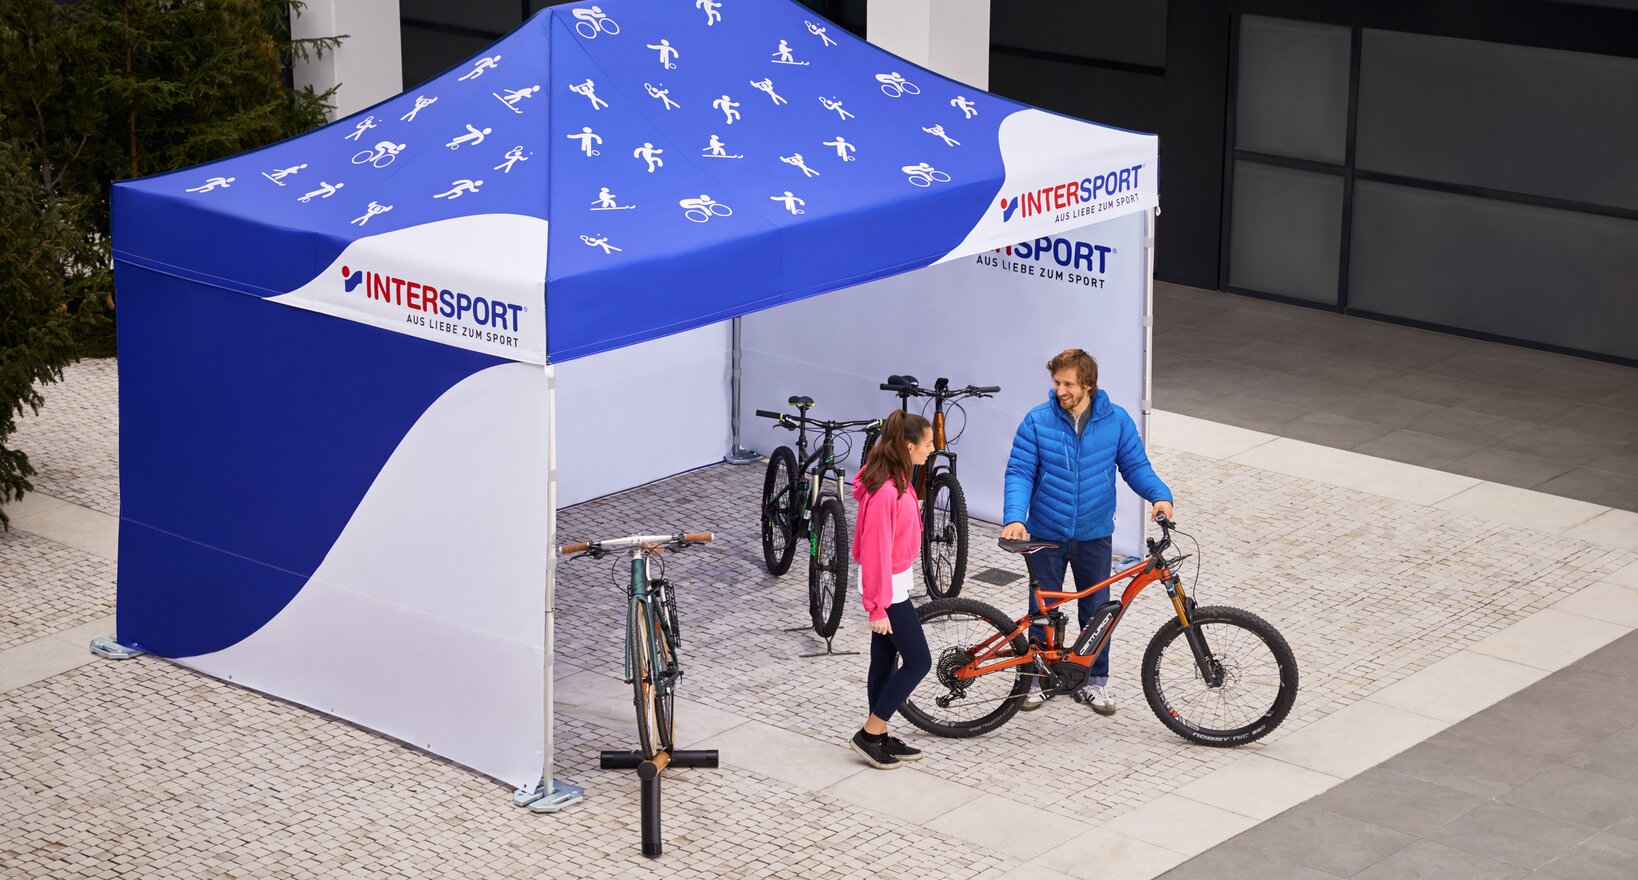 The promotion tent from Intersport is a 4.5x3 m folding gazebo. It is printed all over in white and blue. Various sport icons can be seen on the roof. The salesman shows the customer the bicycle.